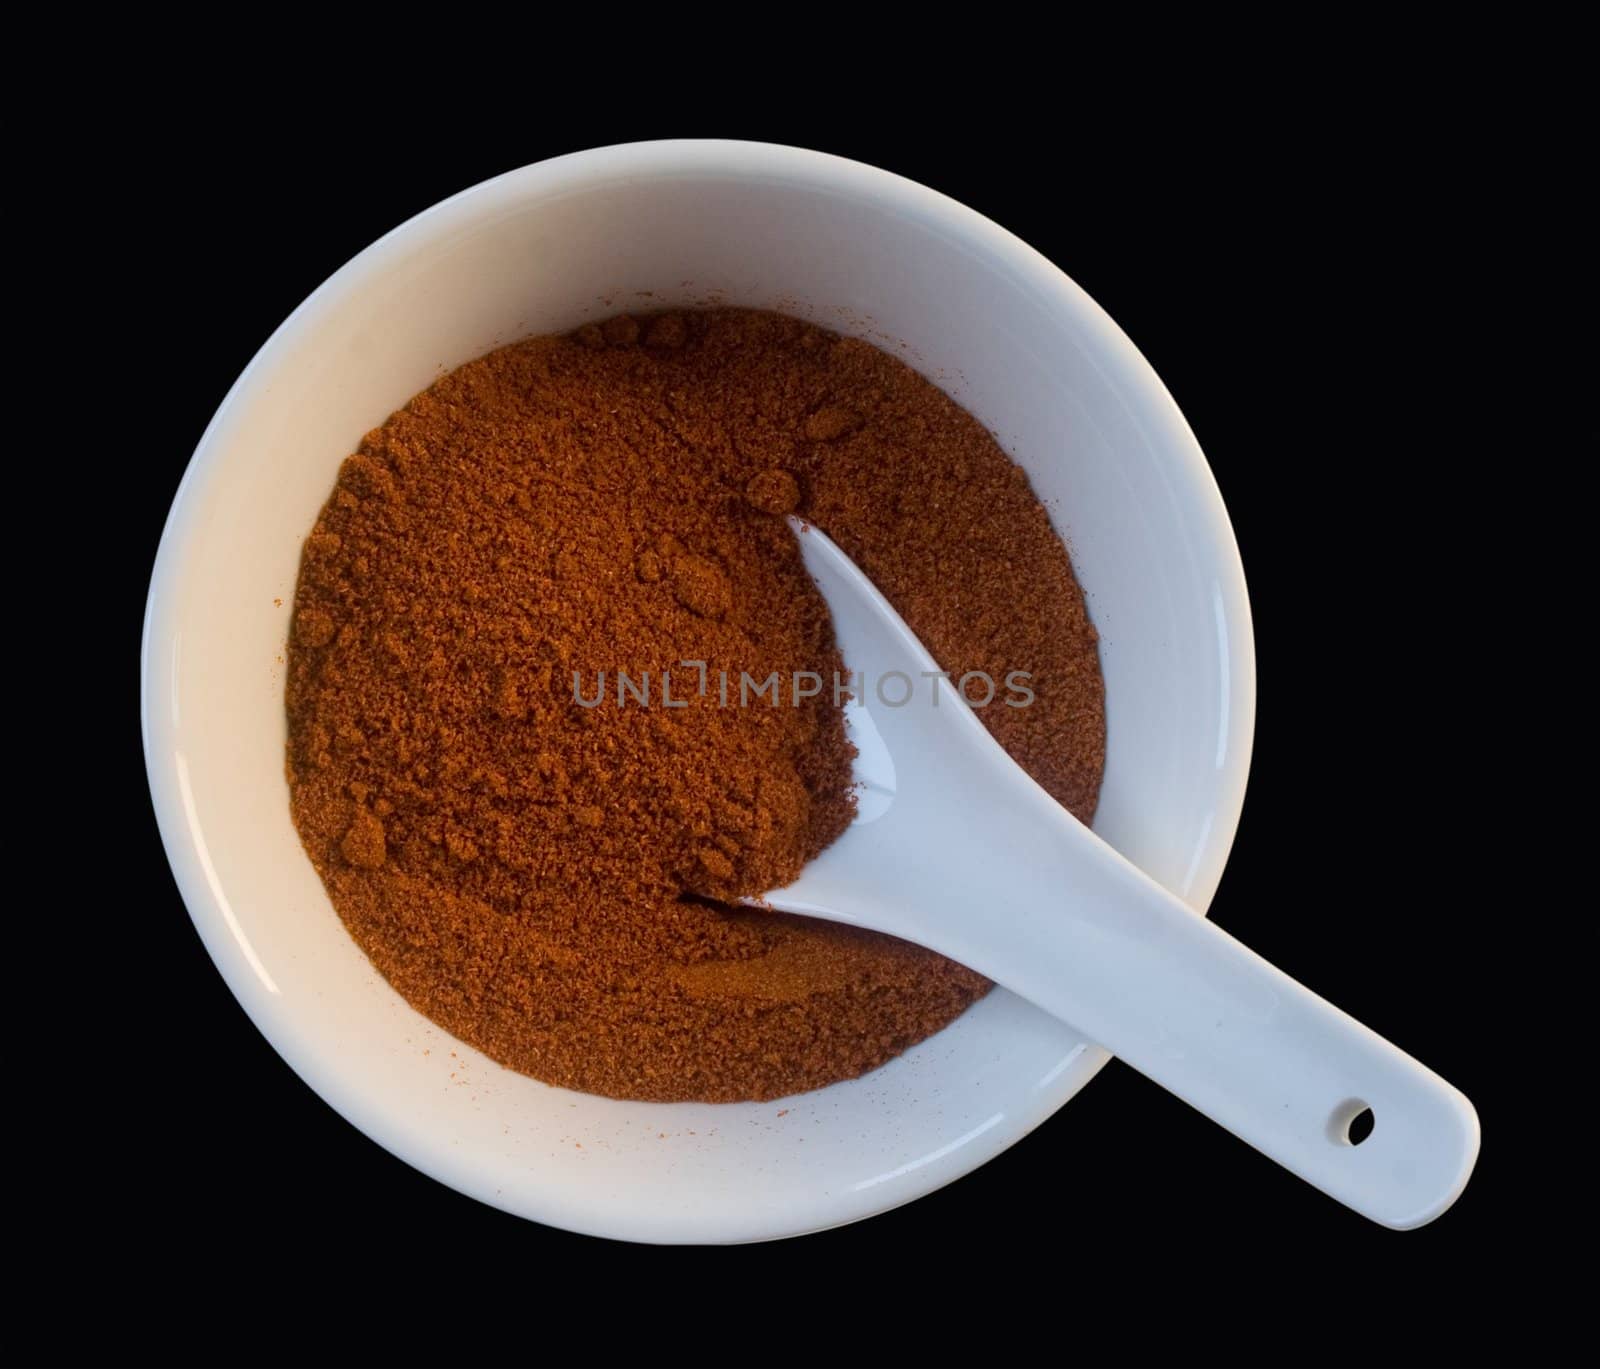 grounded red pepper in white cup isolated on black